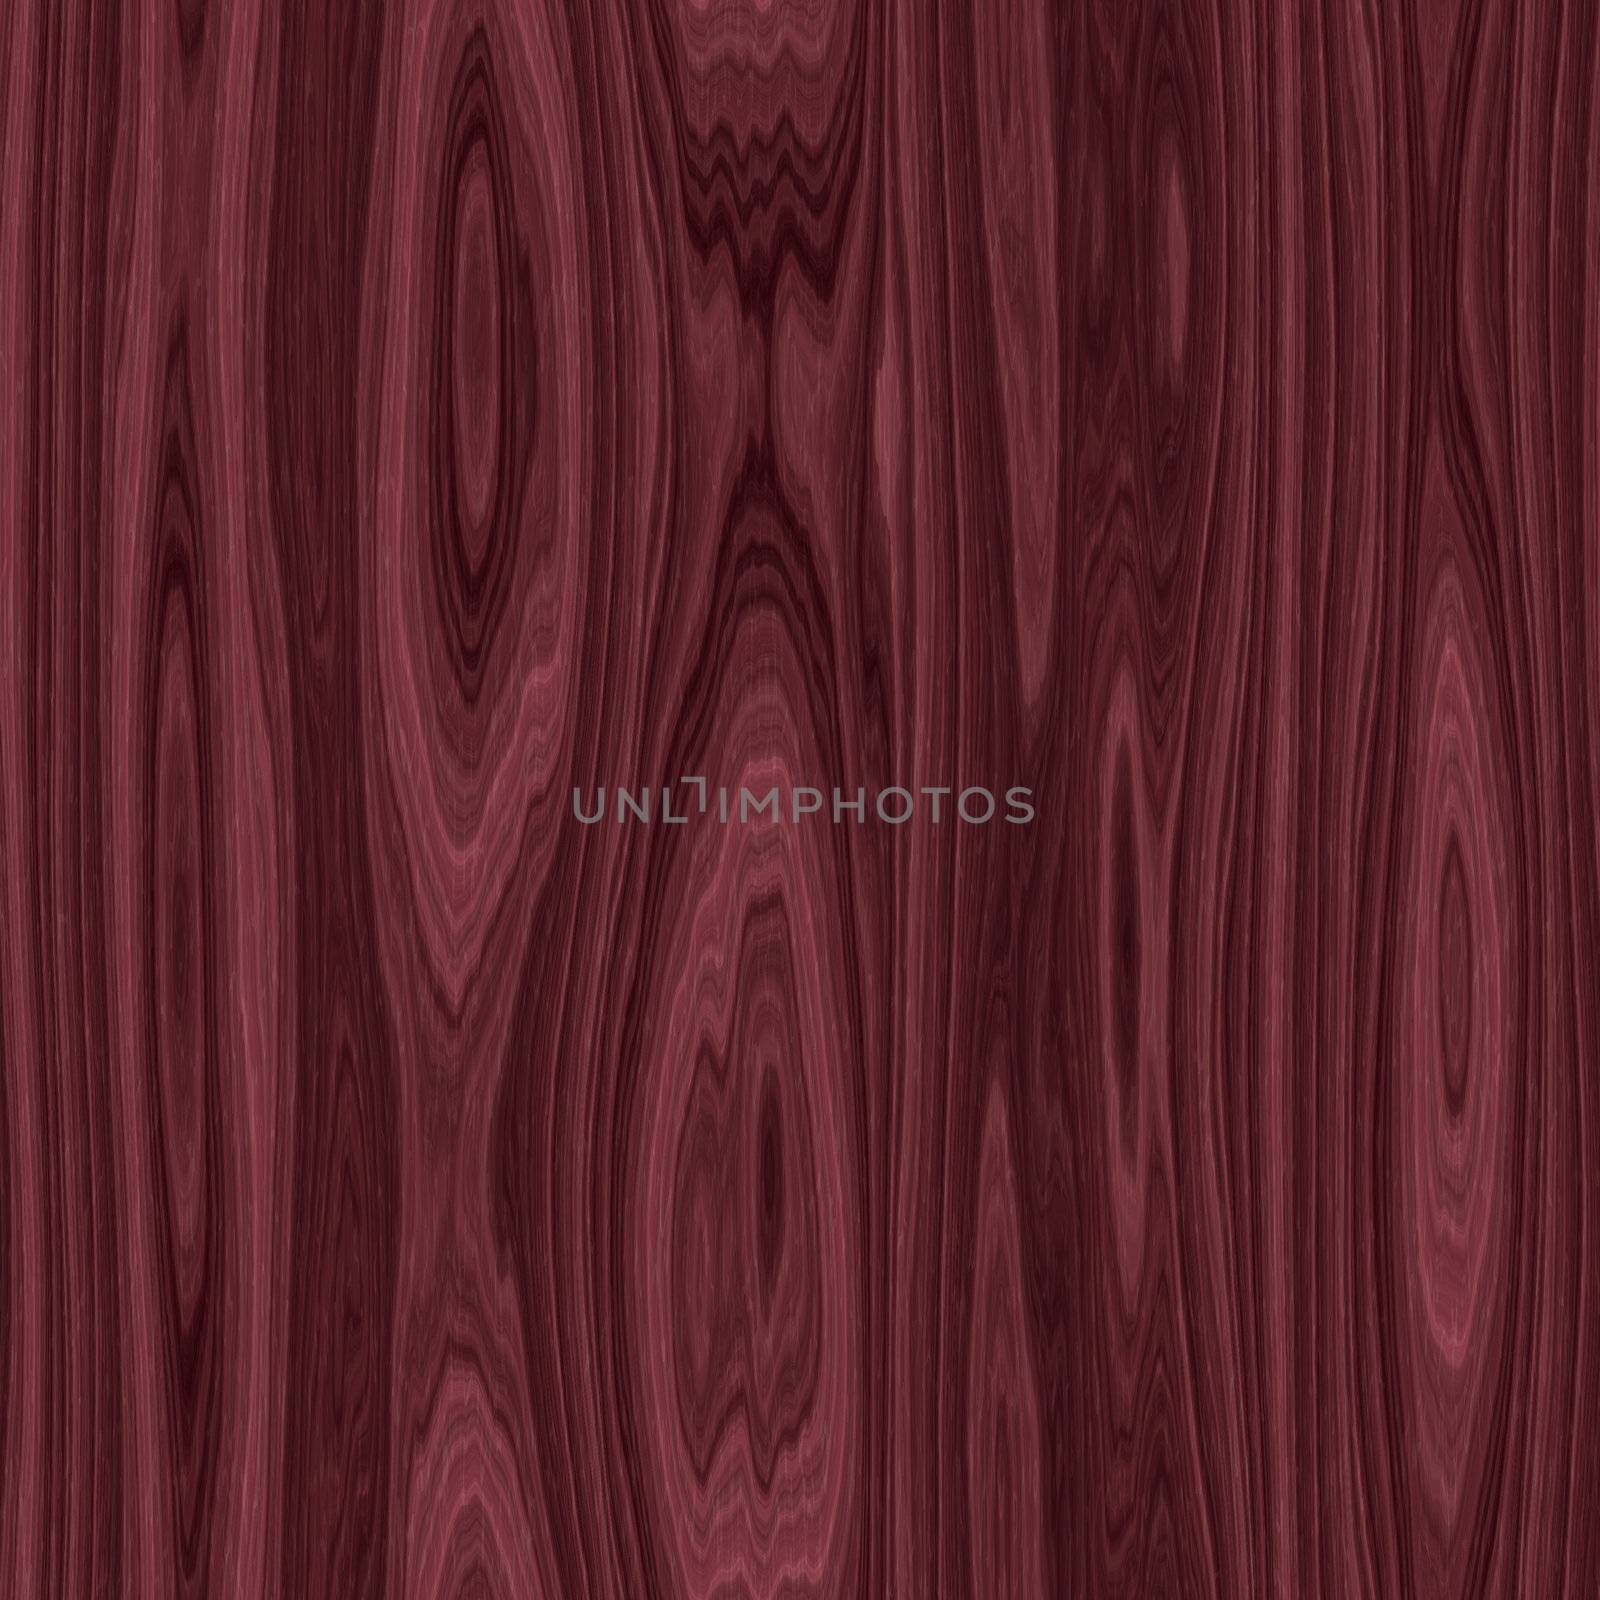 wood with visible knots - seamless texture
